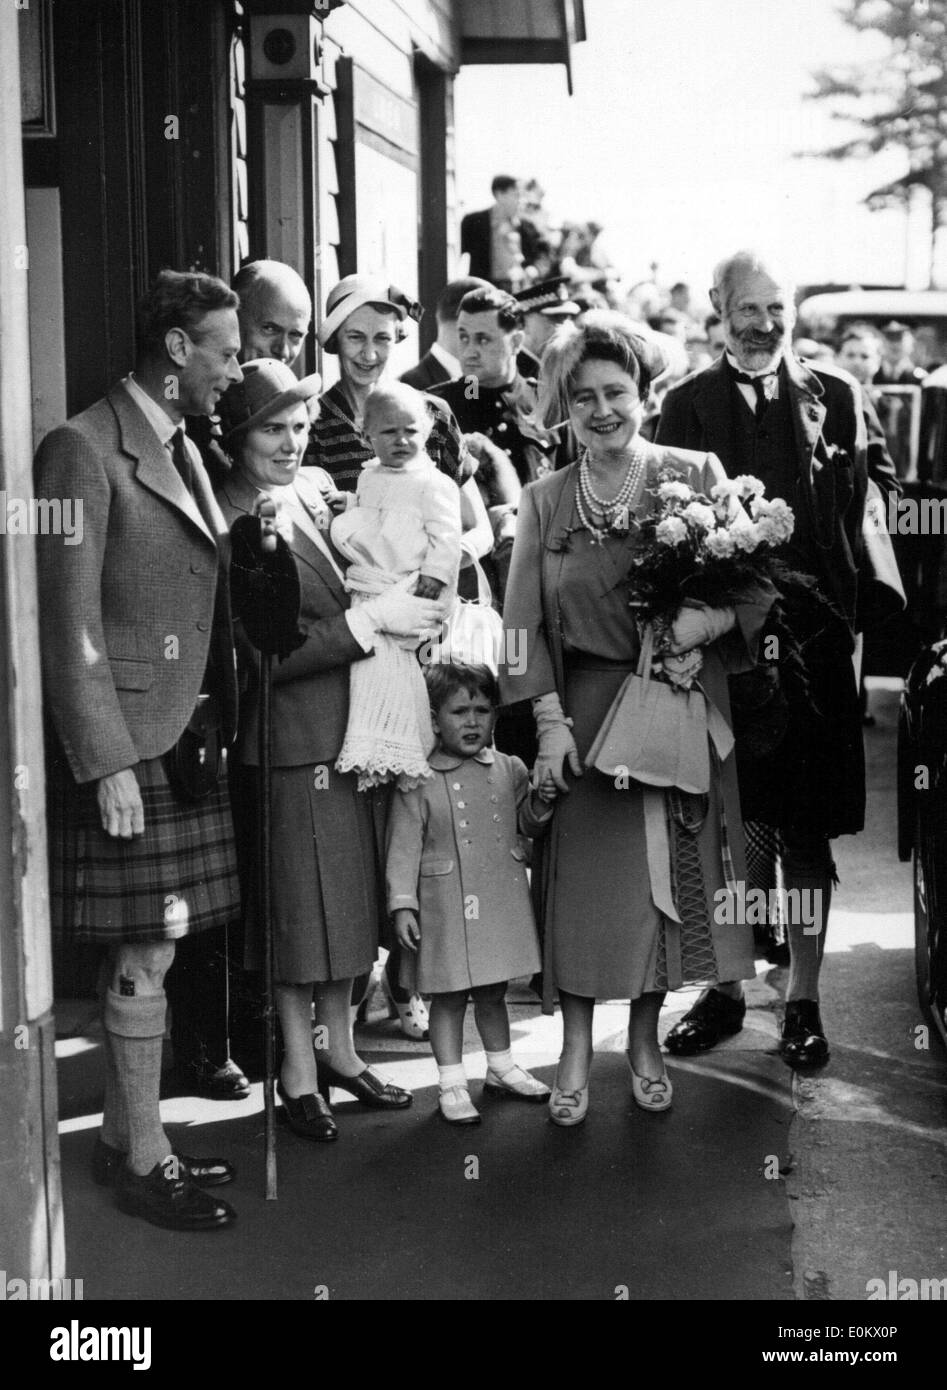 Members of the Windsor Royal Family arriving in Balmoral Stock Photo